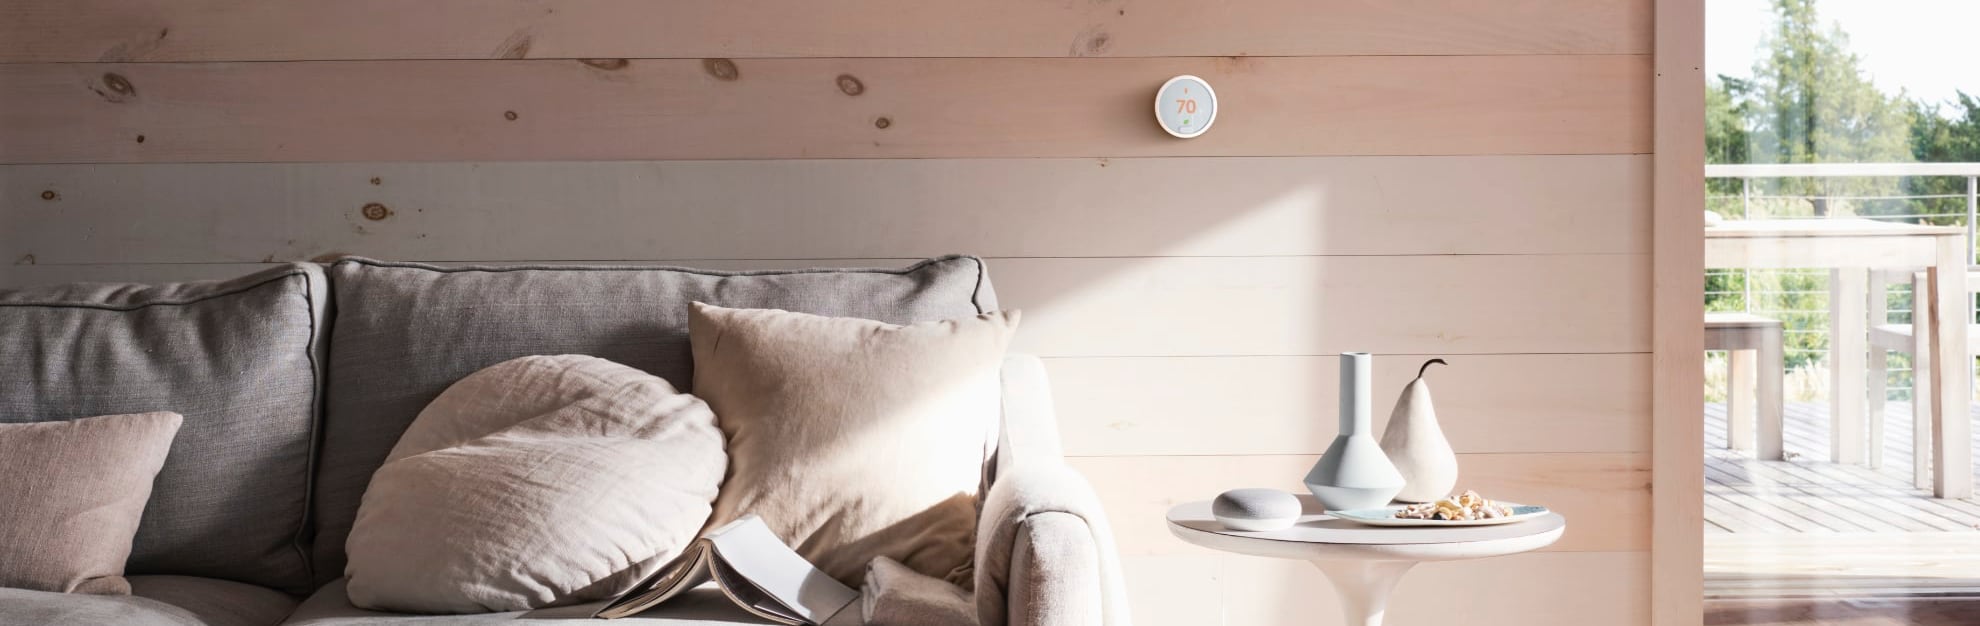 Vivint Home Automation in Modesto